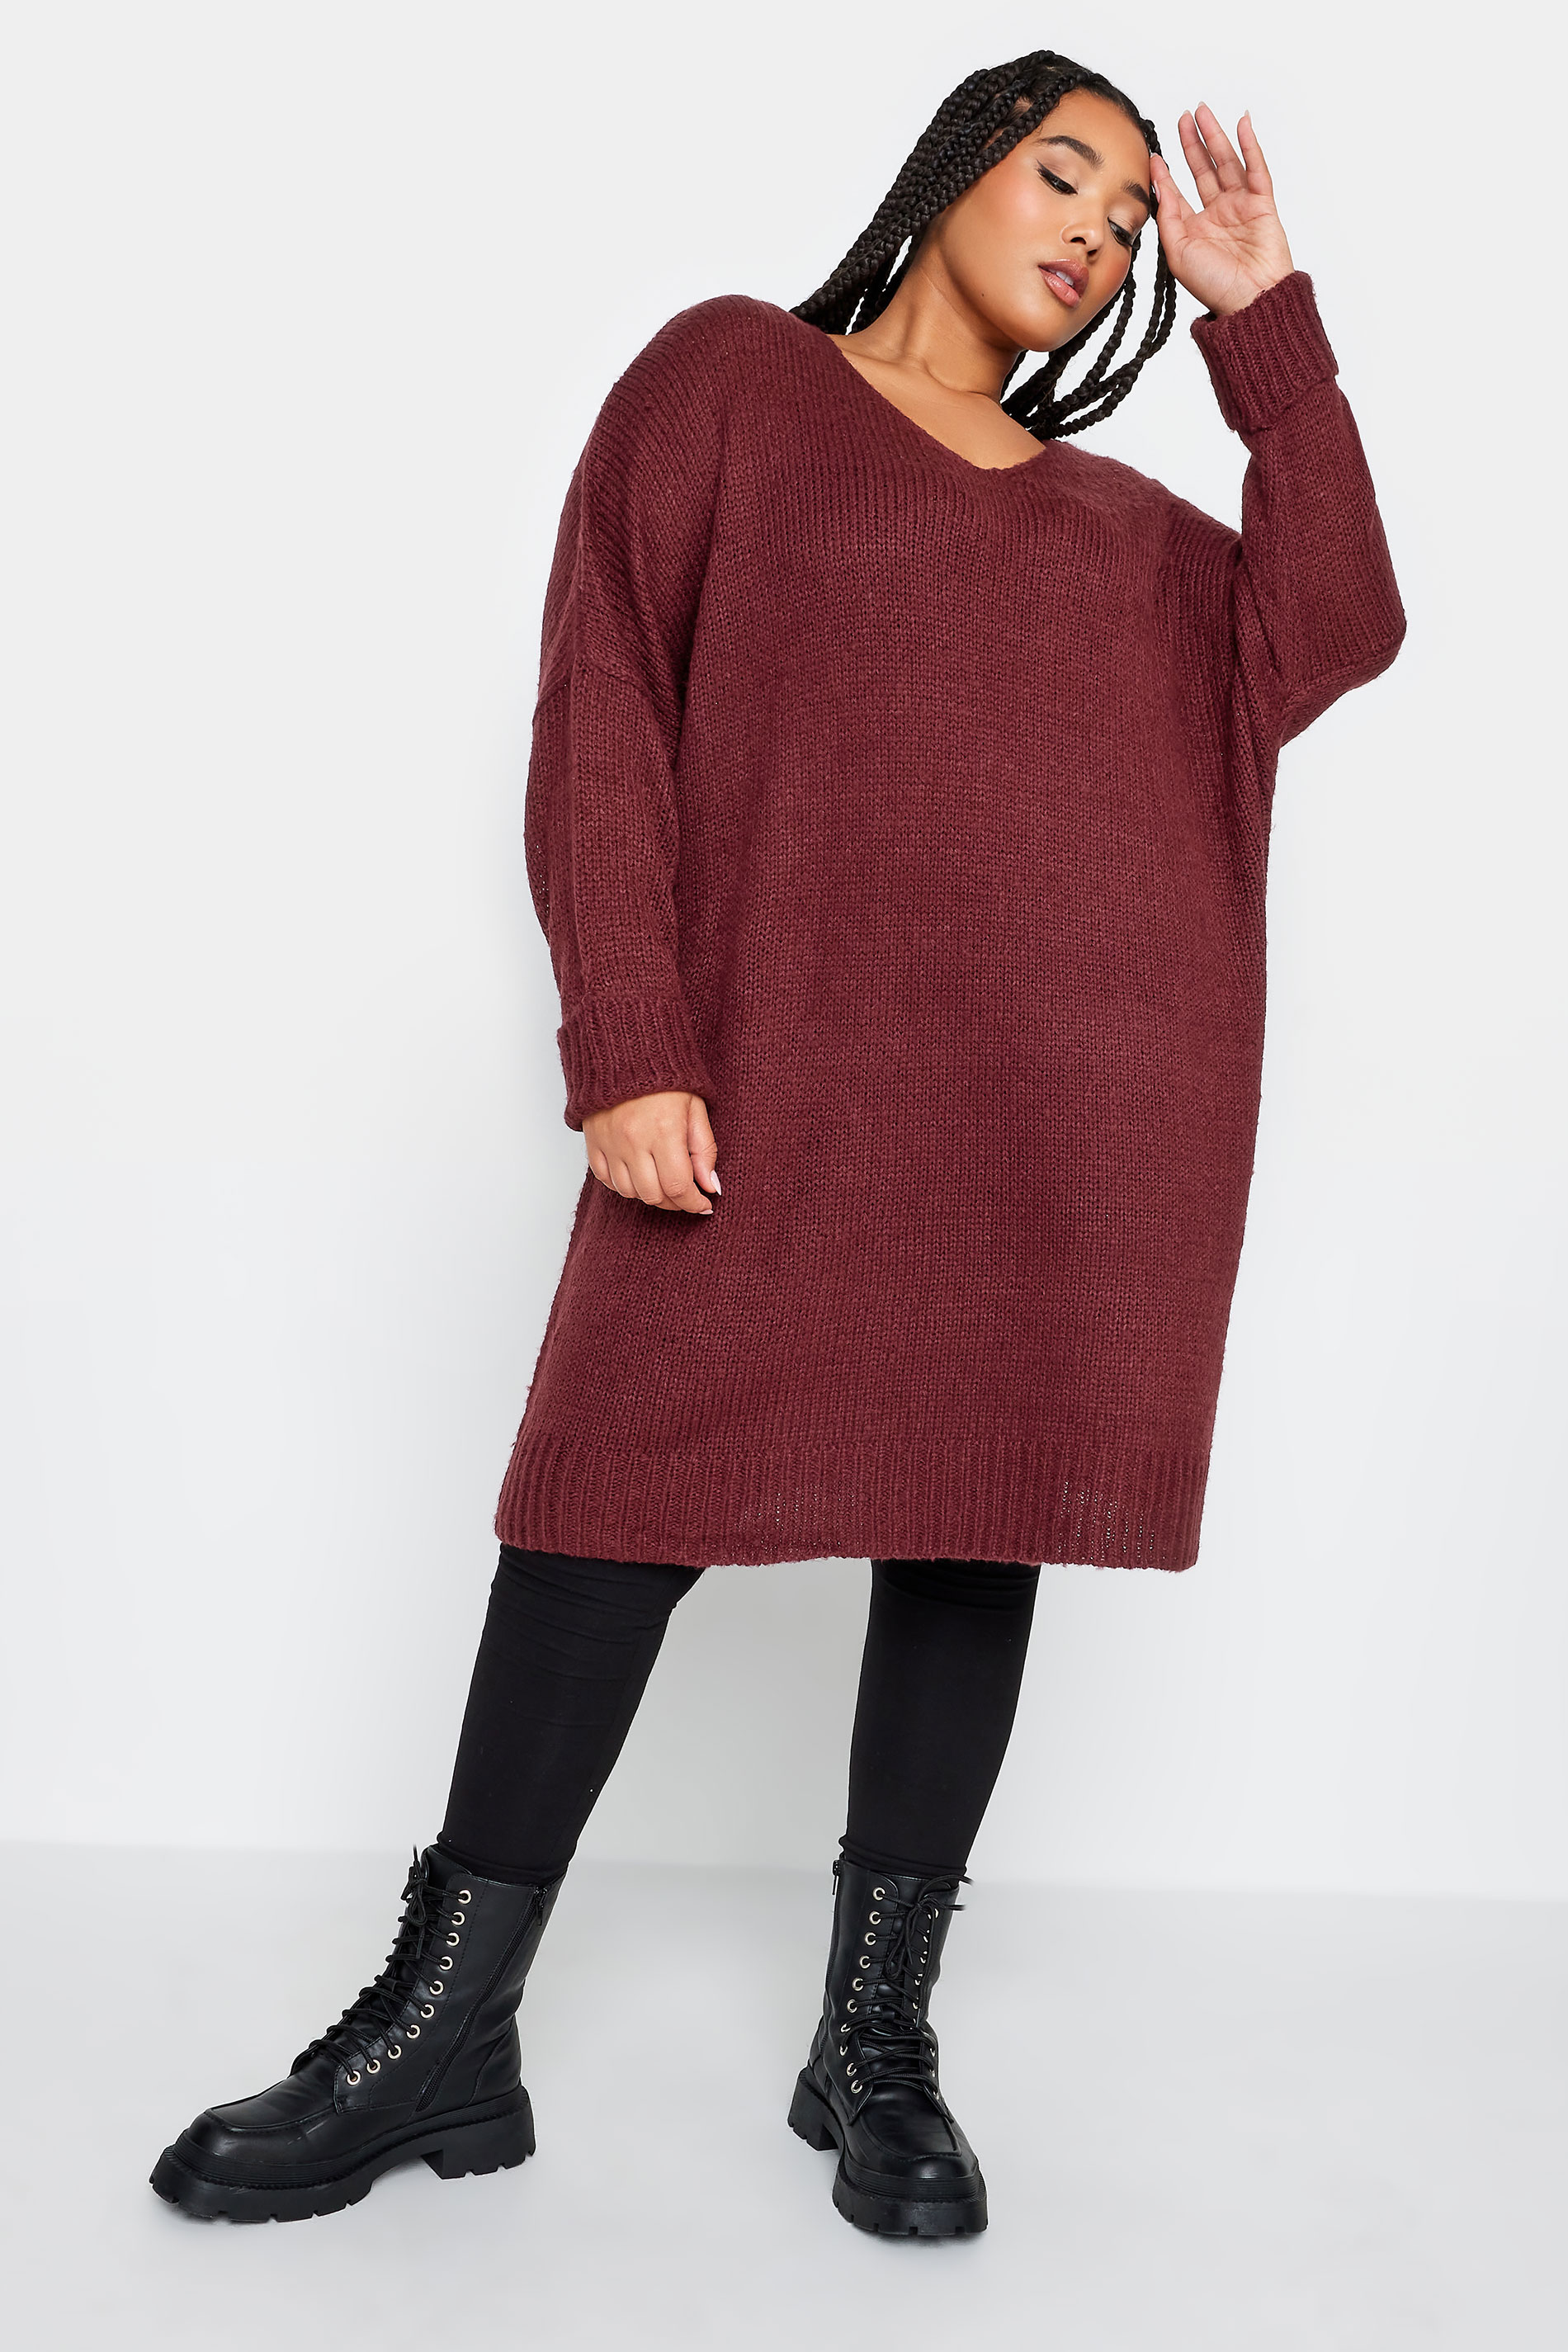 YOURS Plus Size Burgundy Red Midi Knitted Jumper Dress | Yours Clothing 1